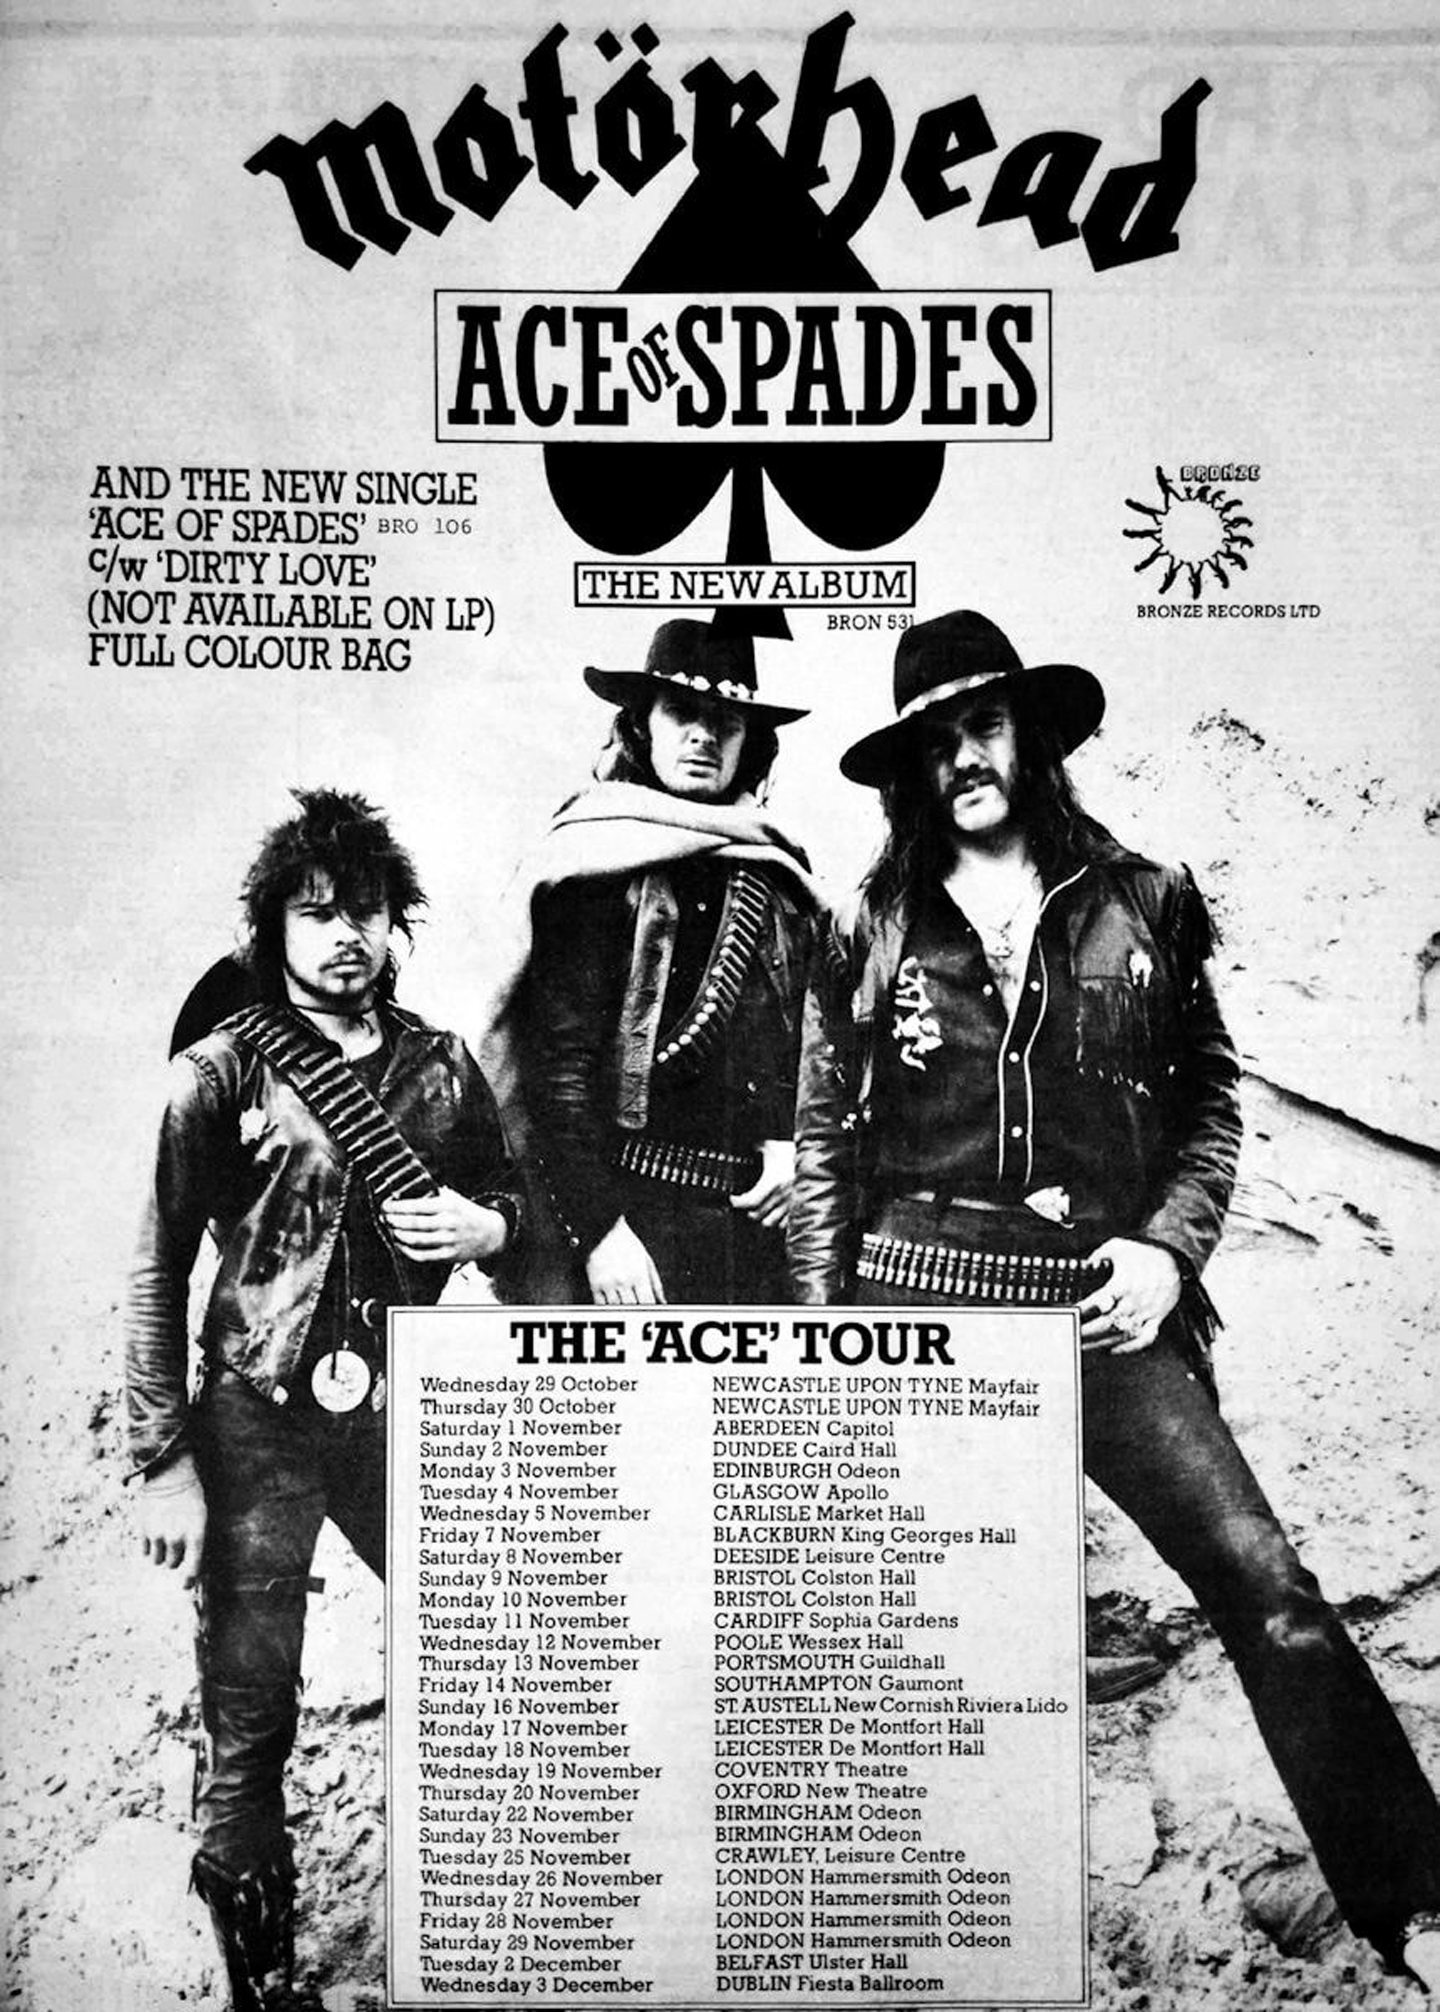 A poster for the Ace of Spades tour.